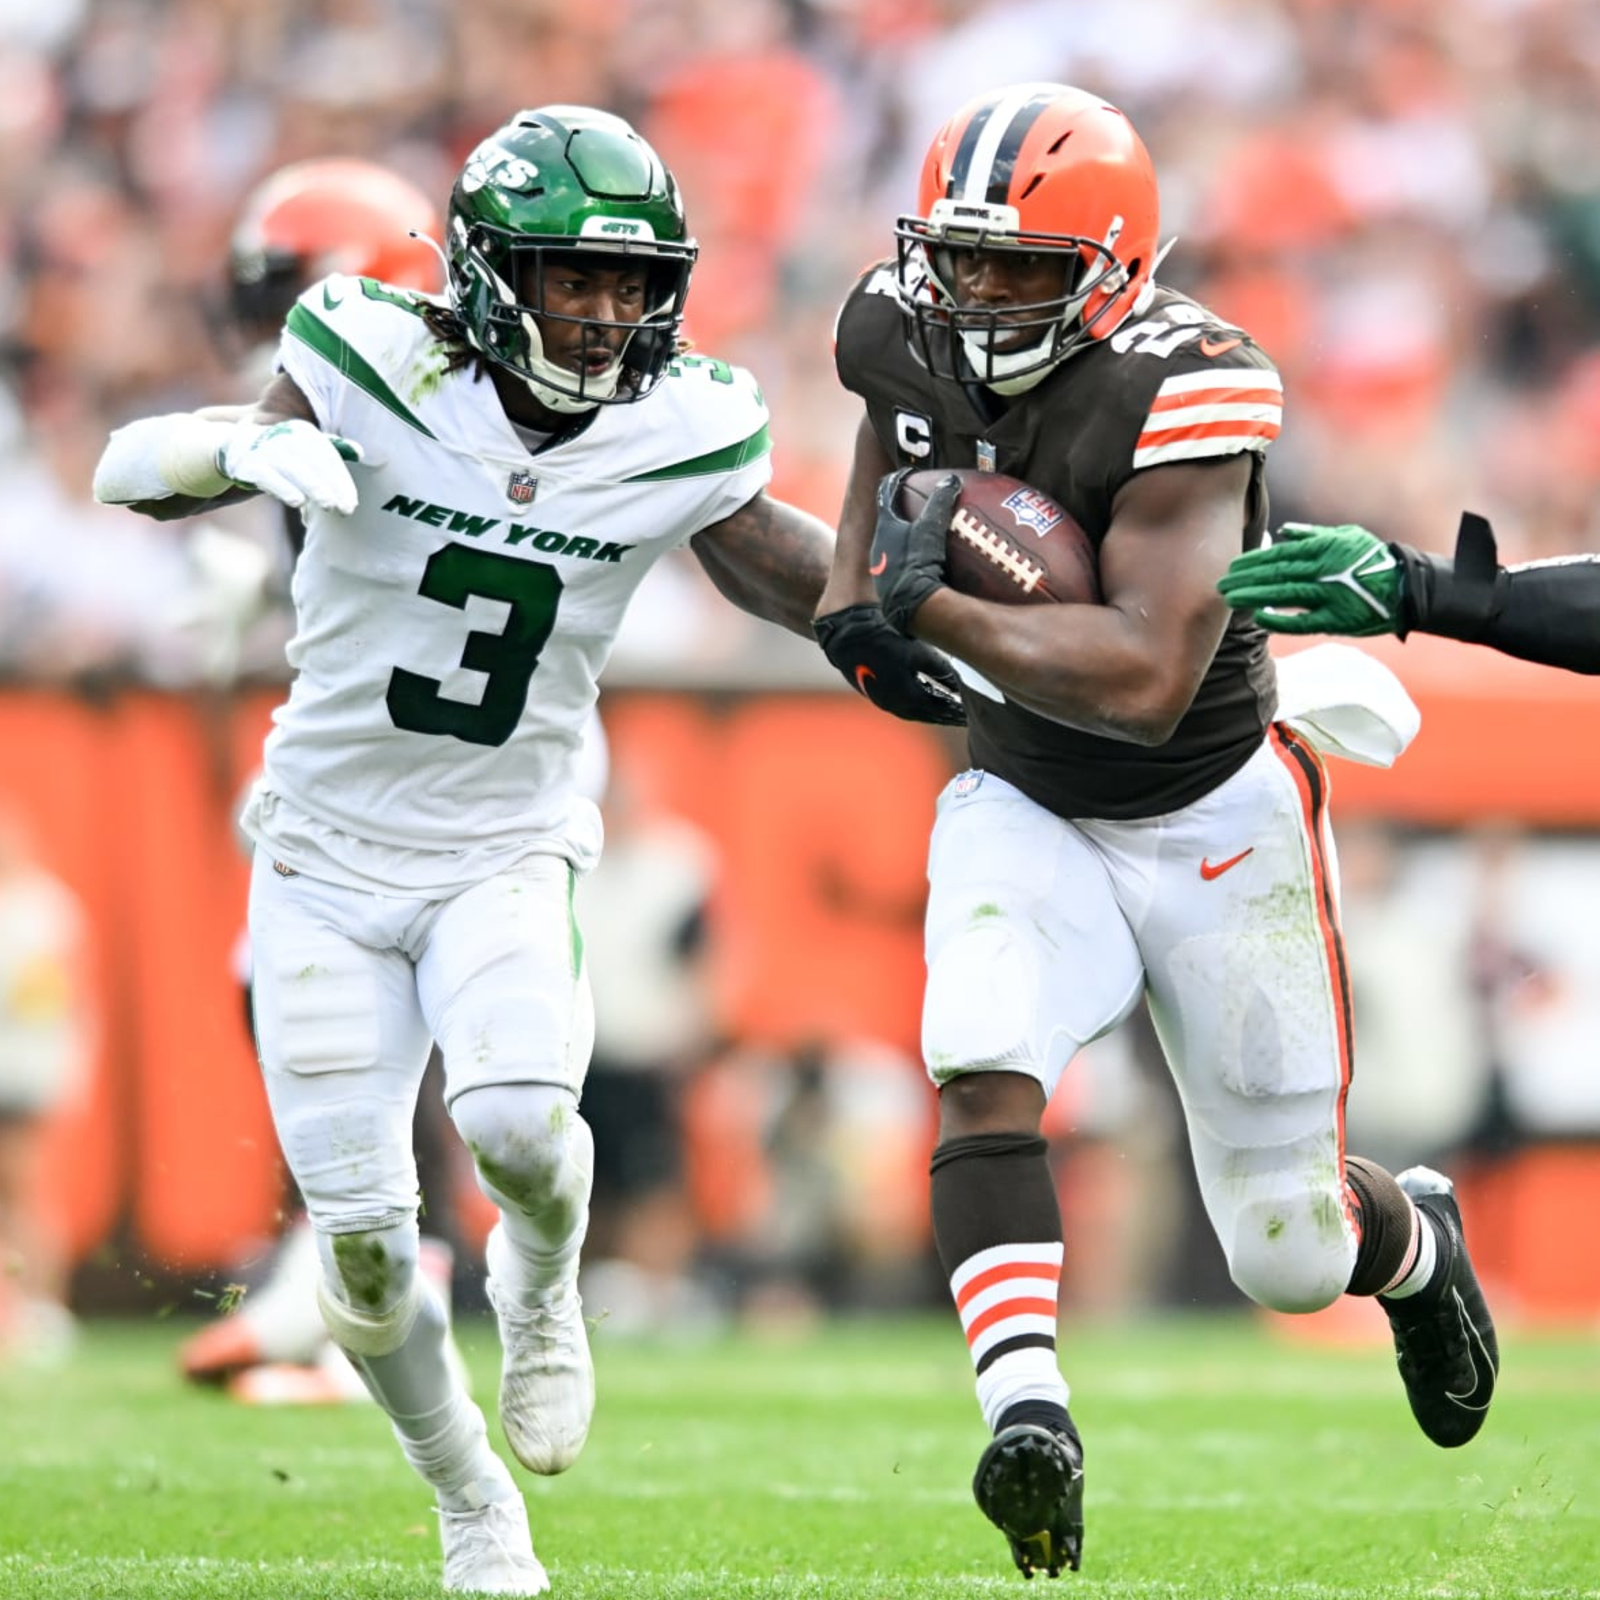 Jets Receive Invitation to Play Browns in 2023 Hall of Fame Game